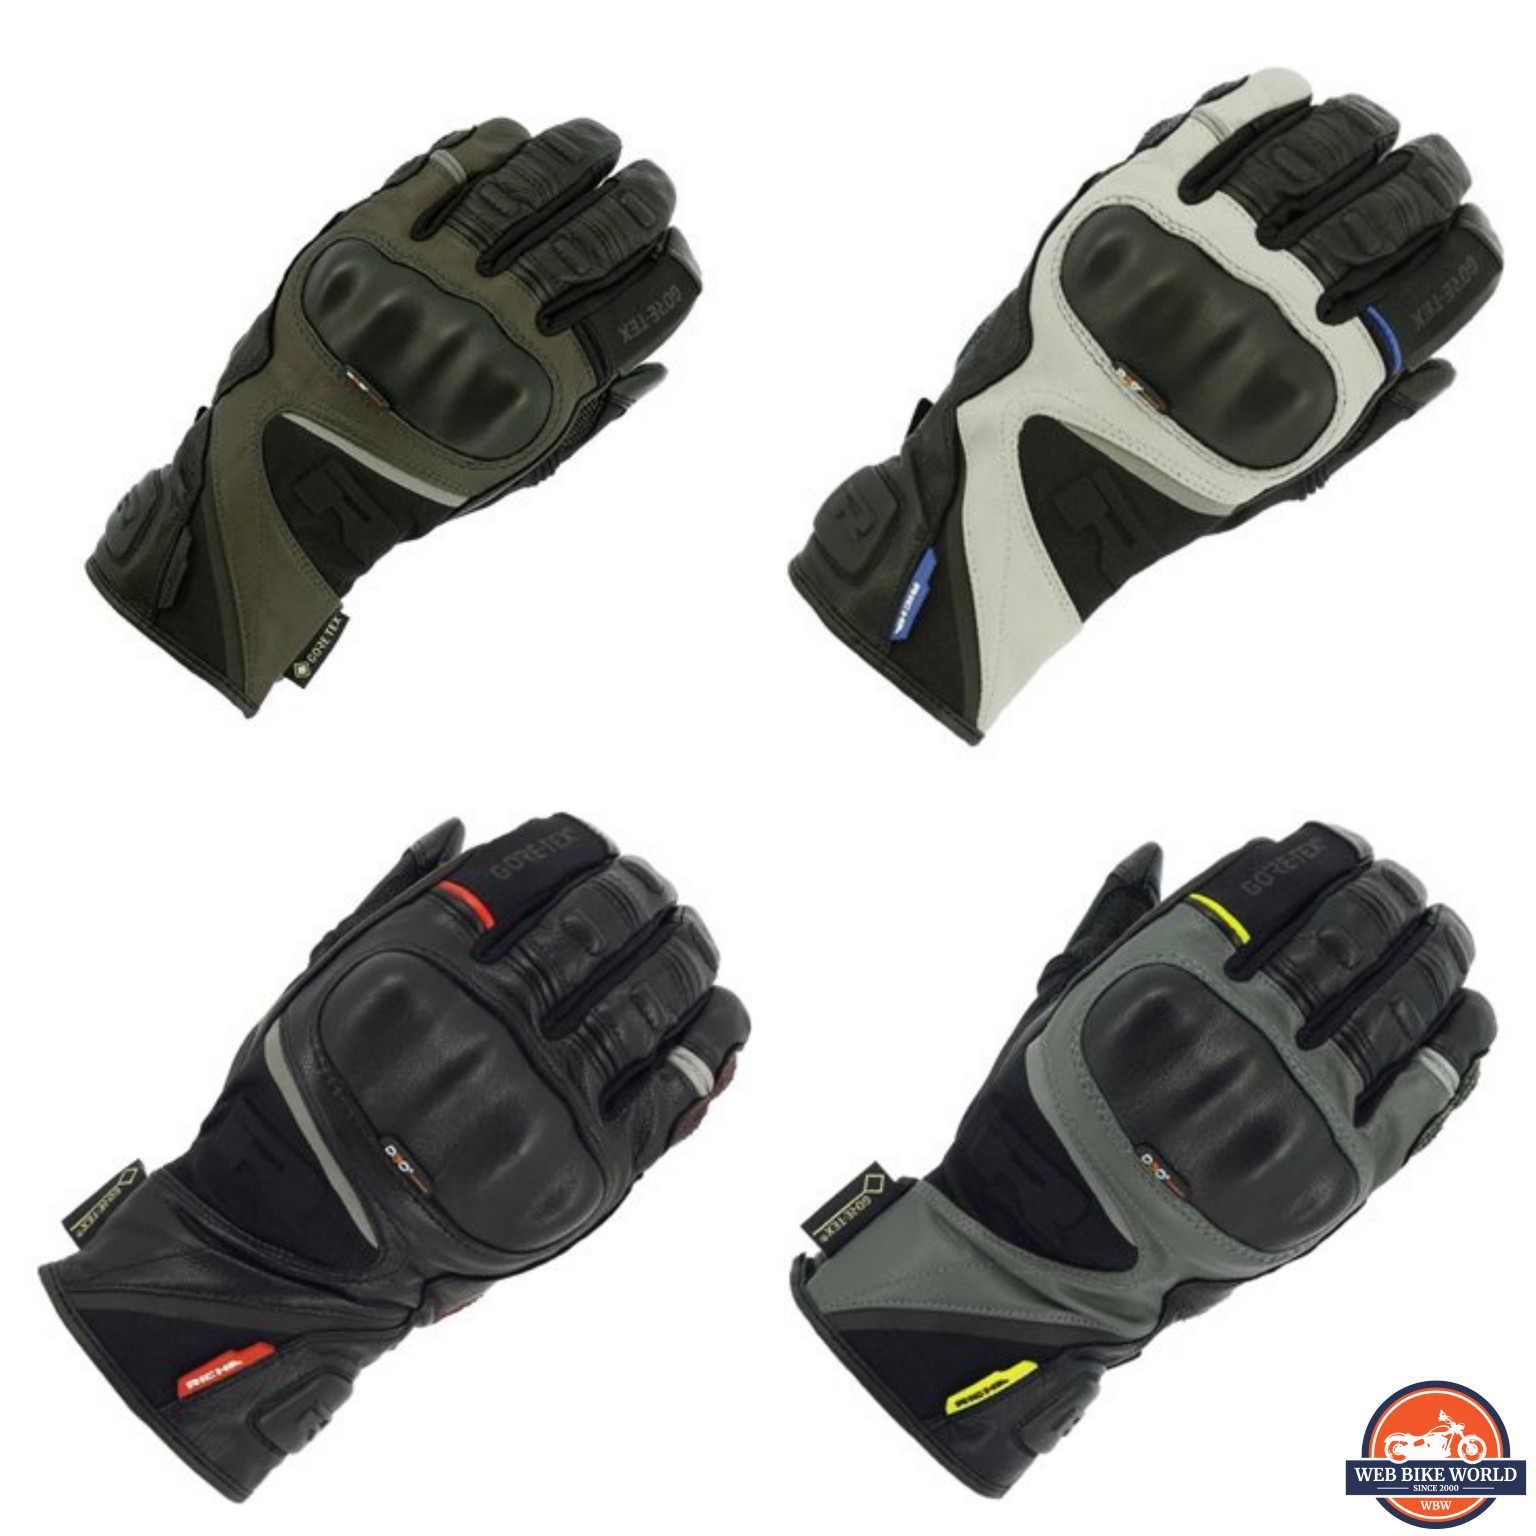 Various colours offered in the Richa Atlantic GTX gloves